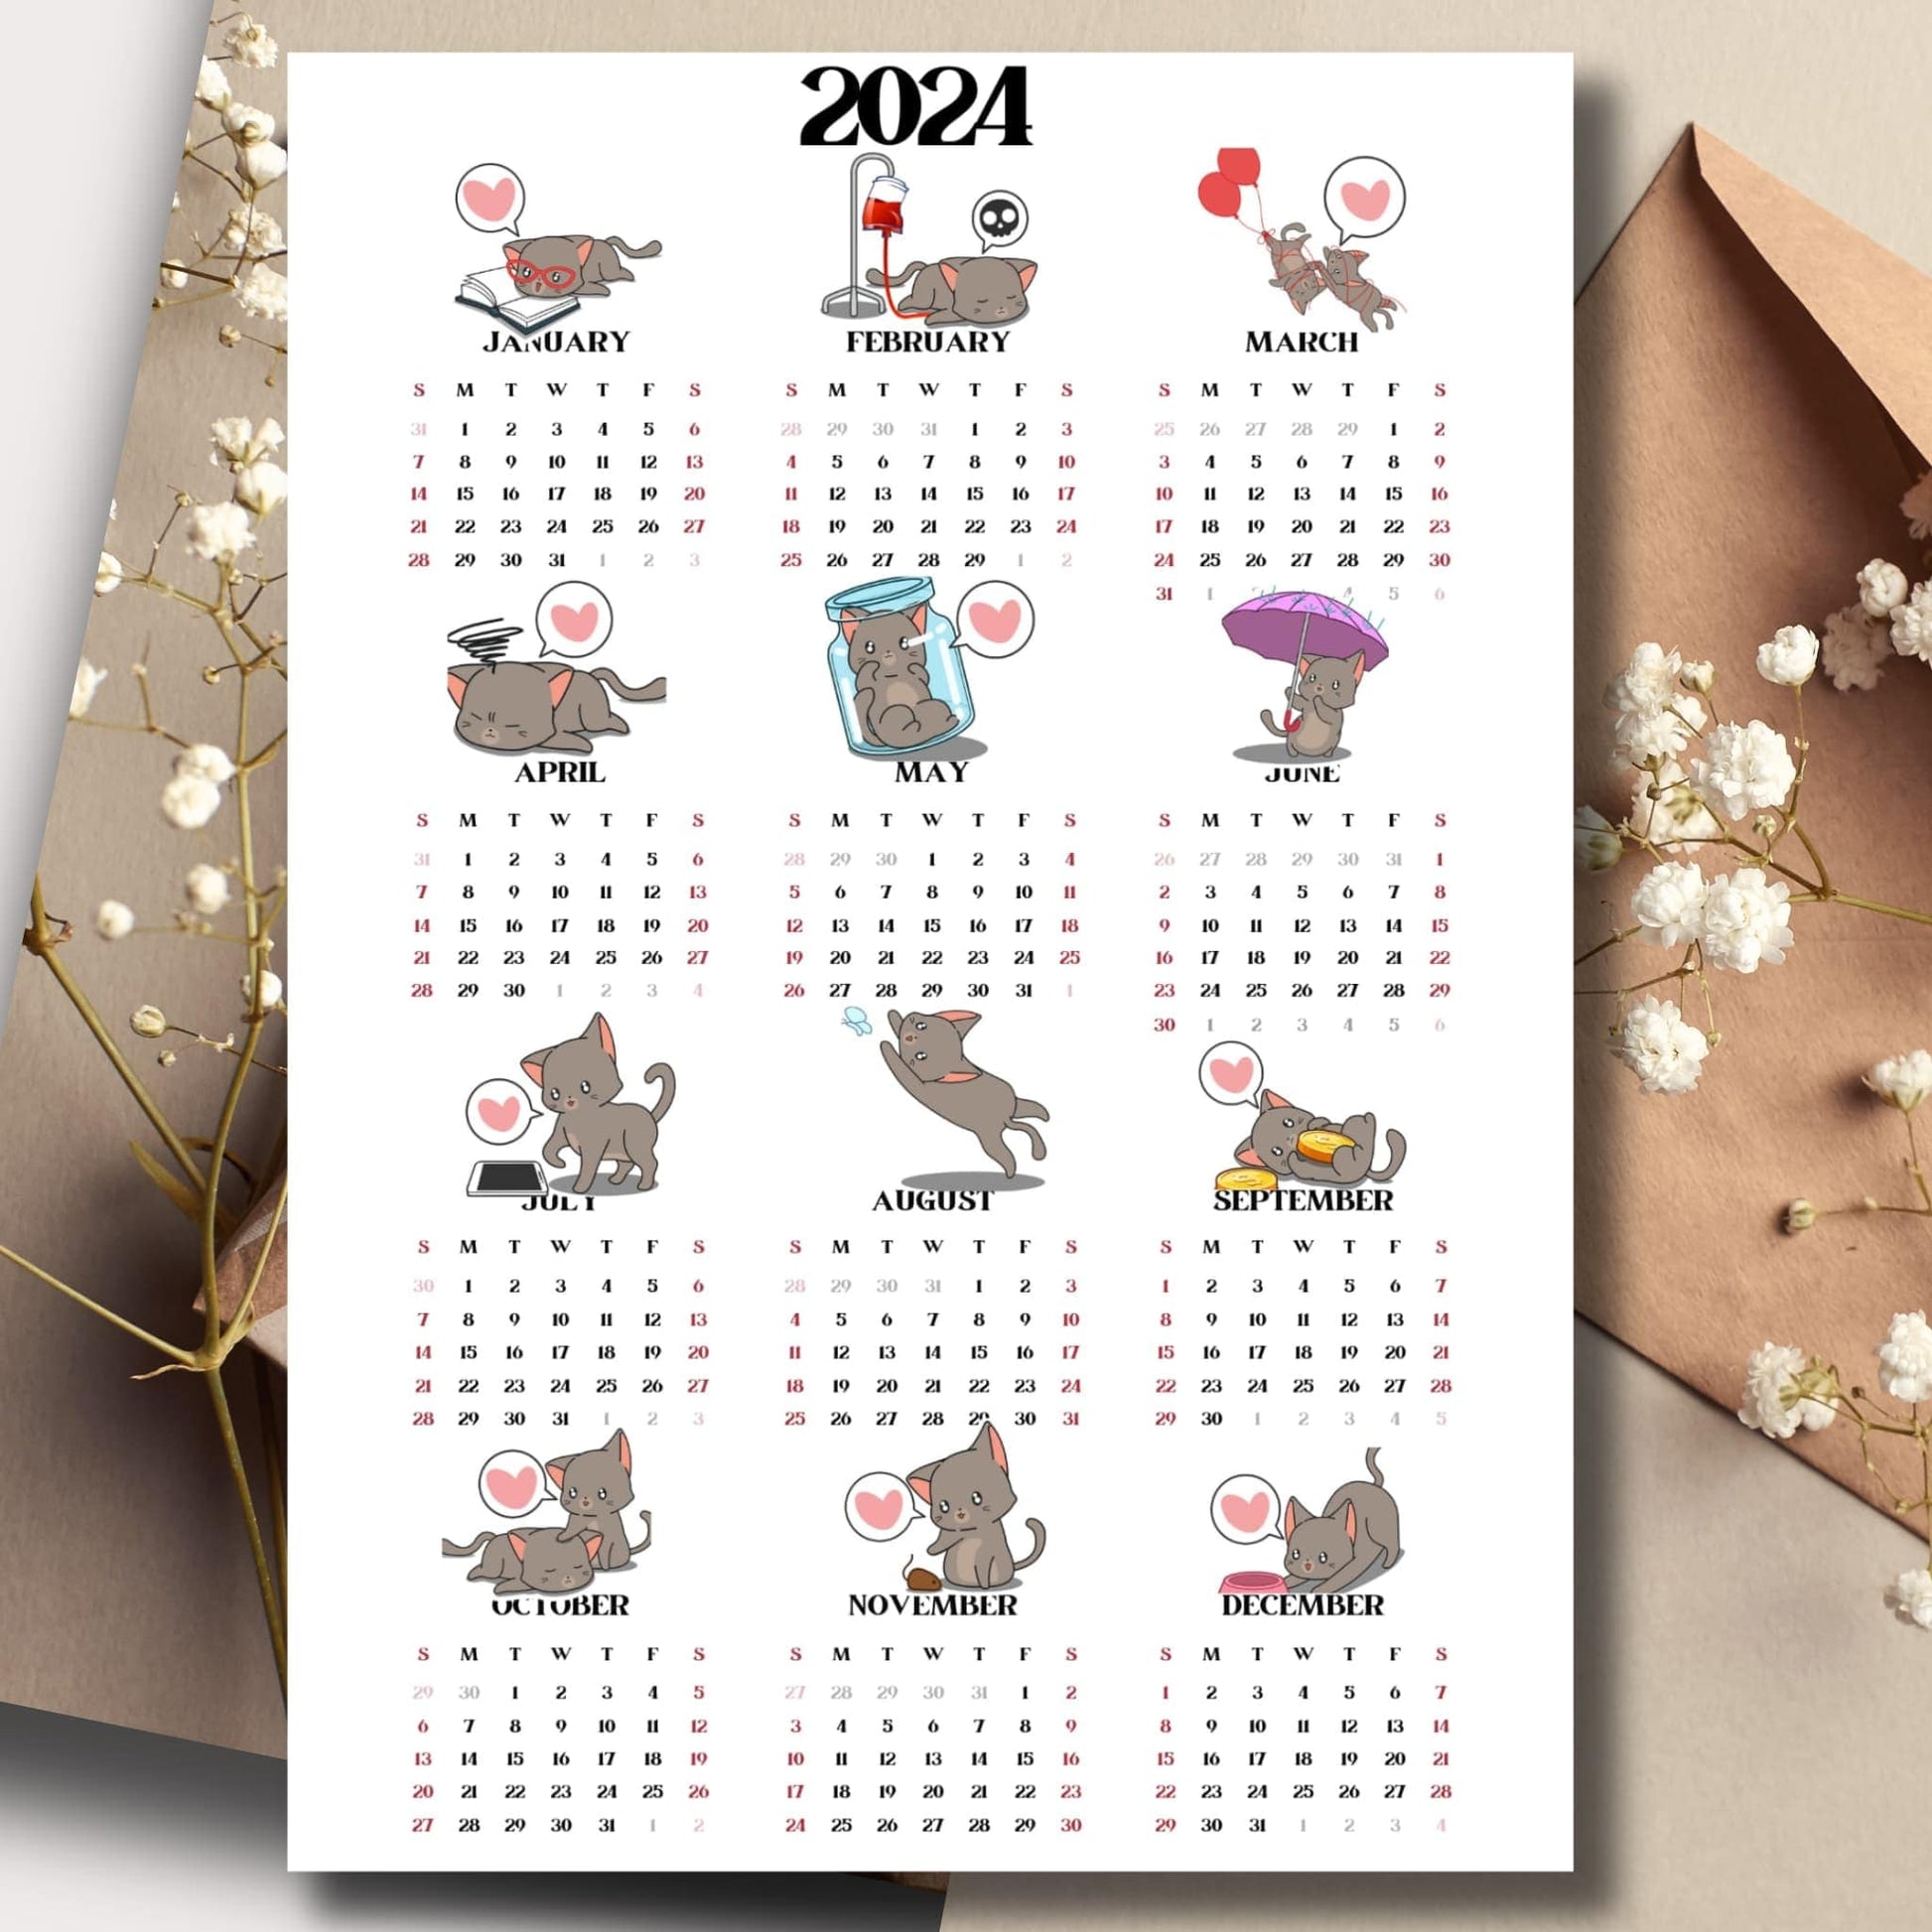 Cute cat illustrated 2024 full year calendar on a table with an envelope and small white flowers in the background.